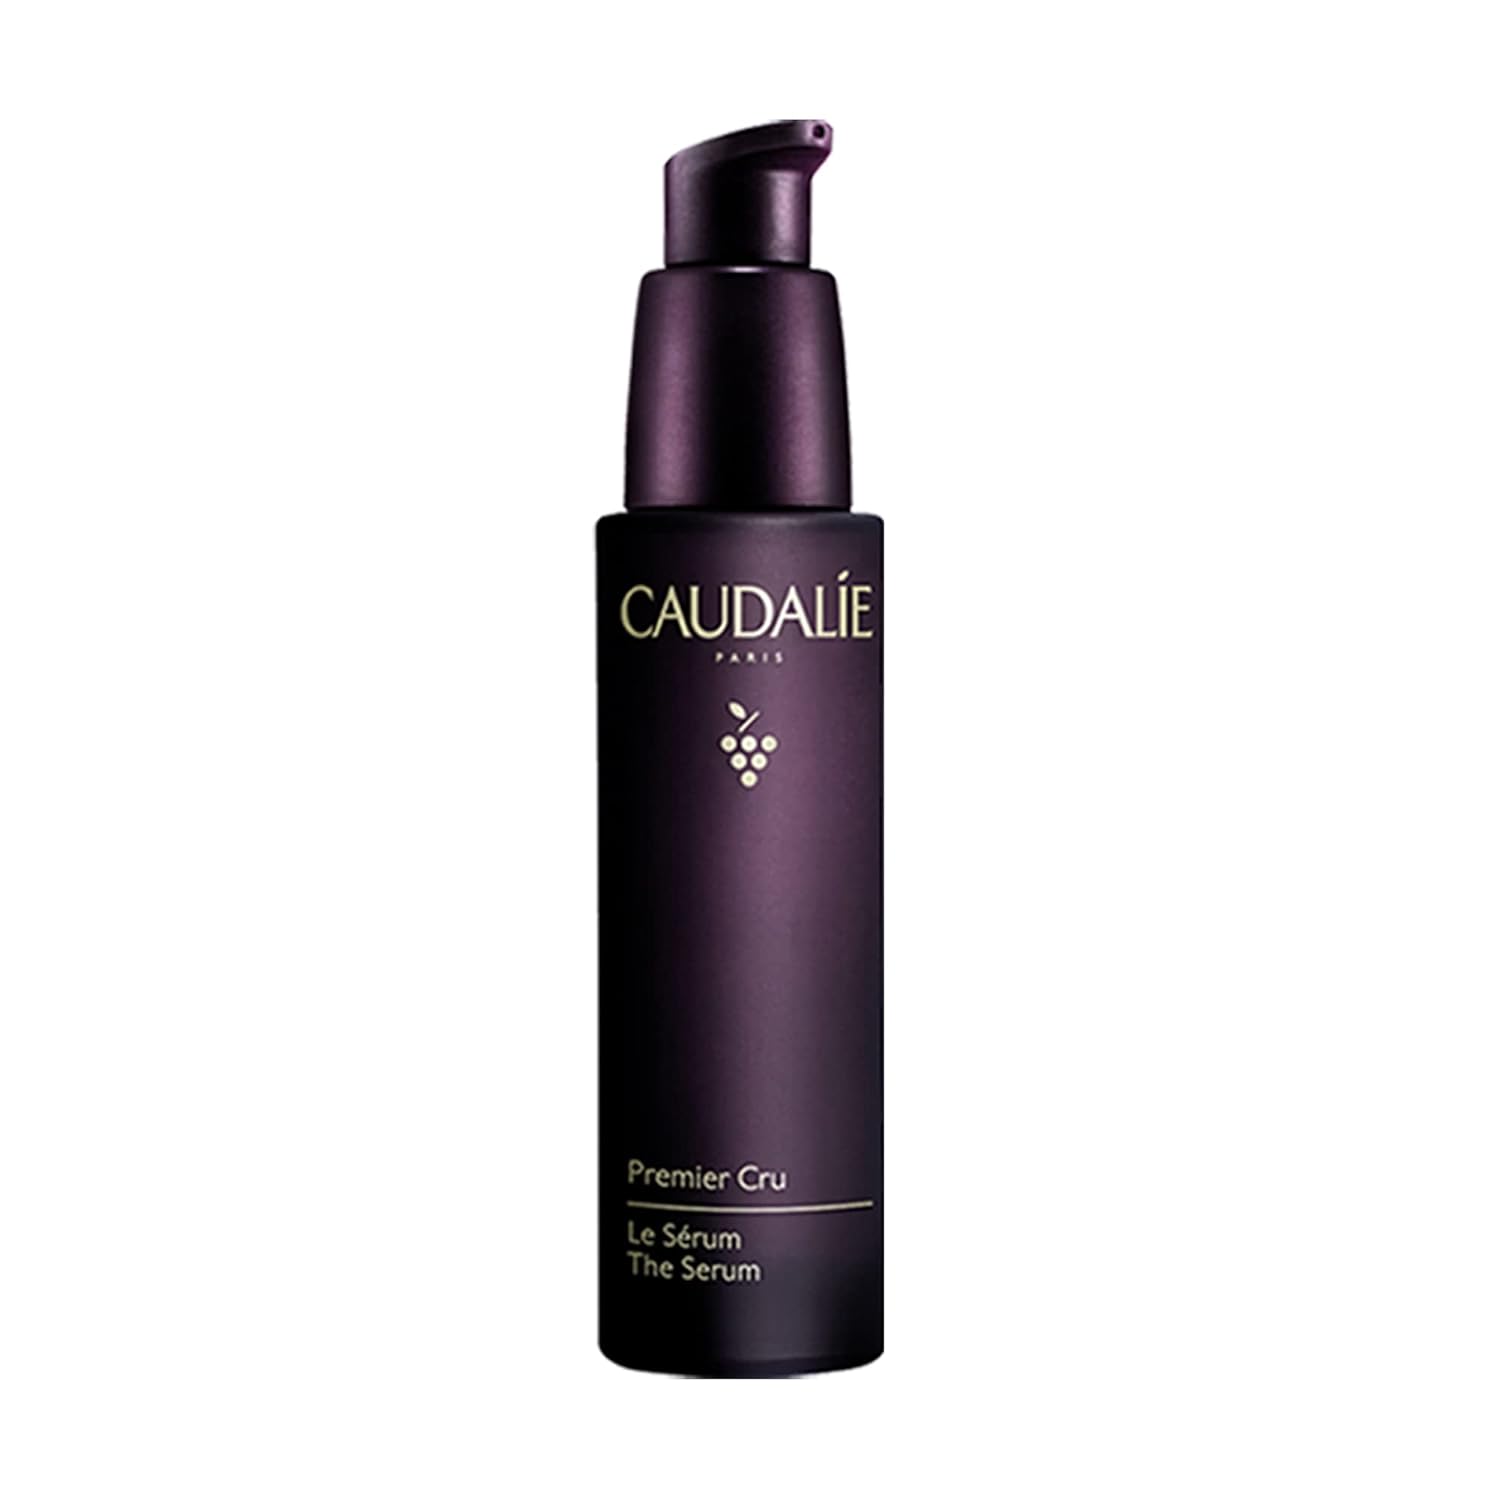 Caudalie Premier Cru Anti-Aging Face Serum with Hyaluronic acid, for Instantly Tightened and Hydrated skin